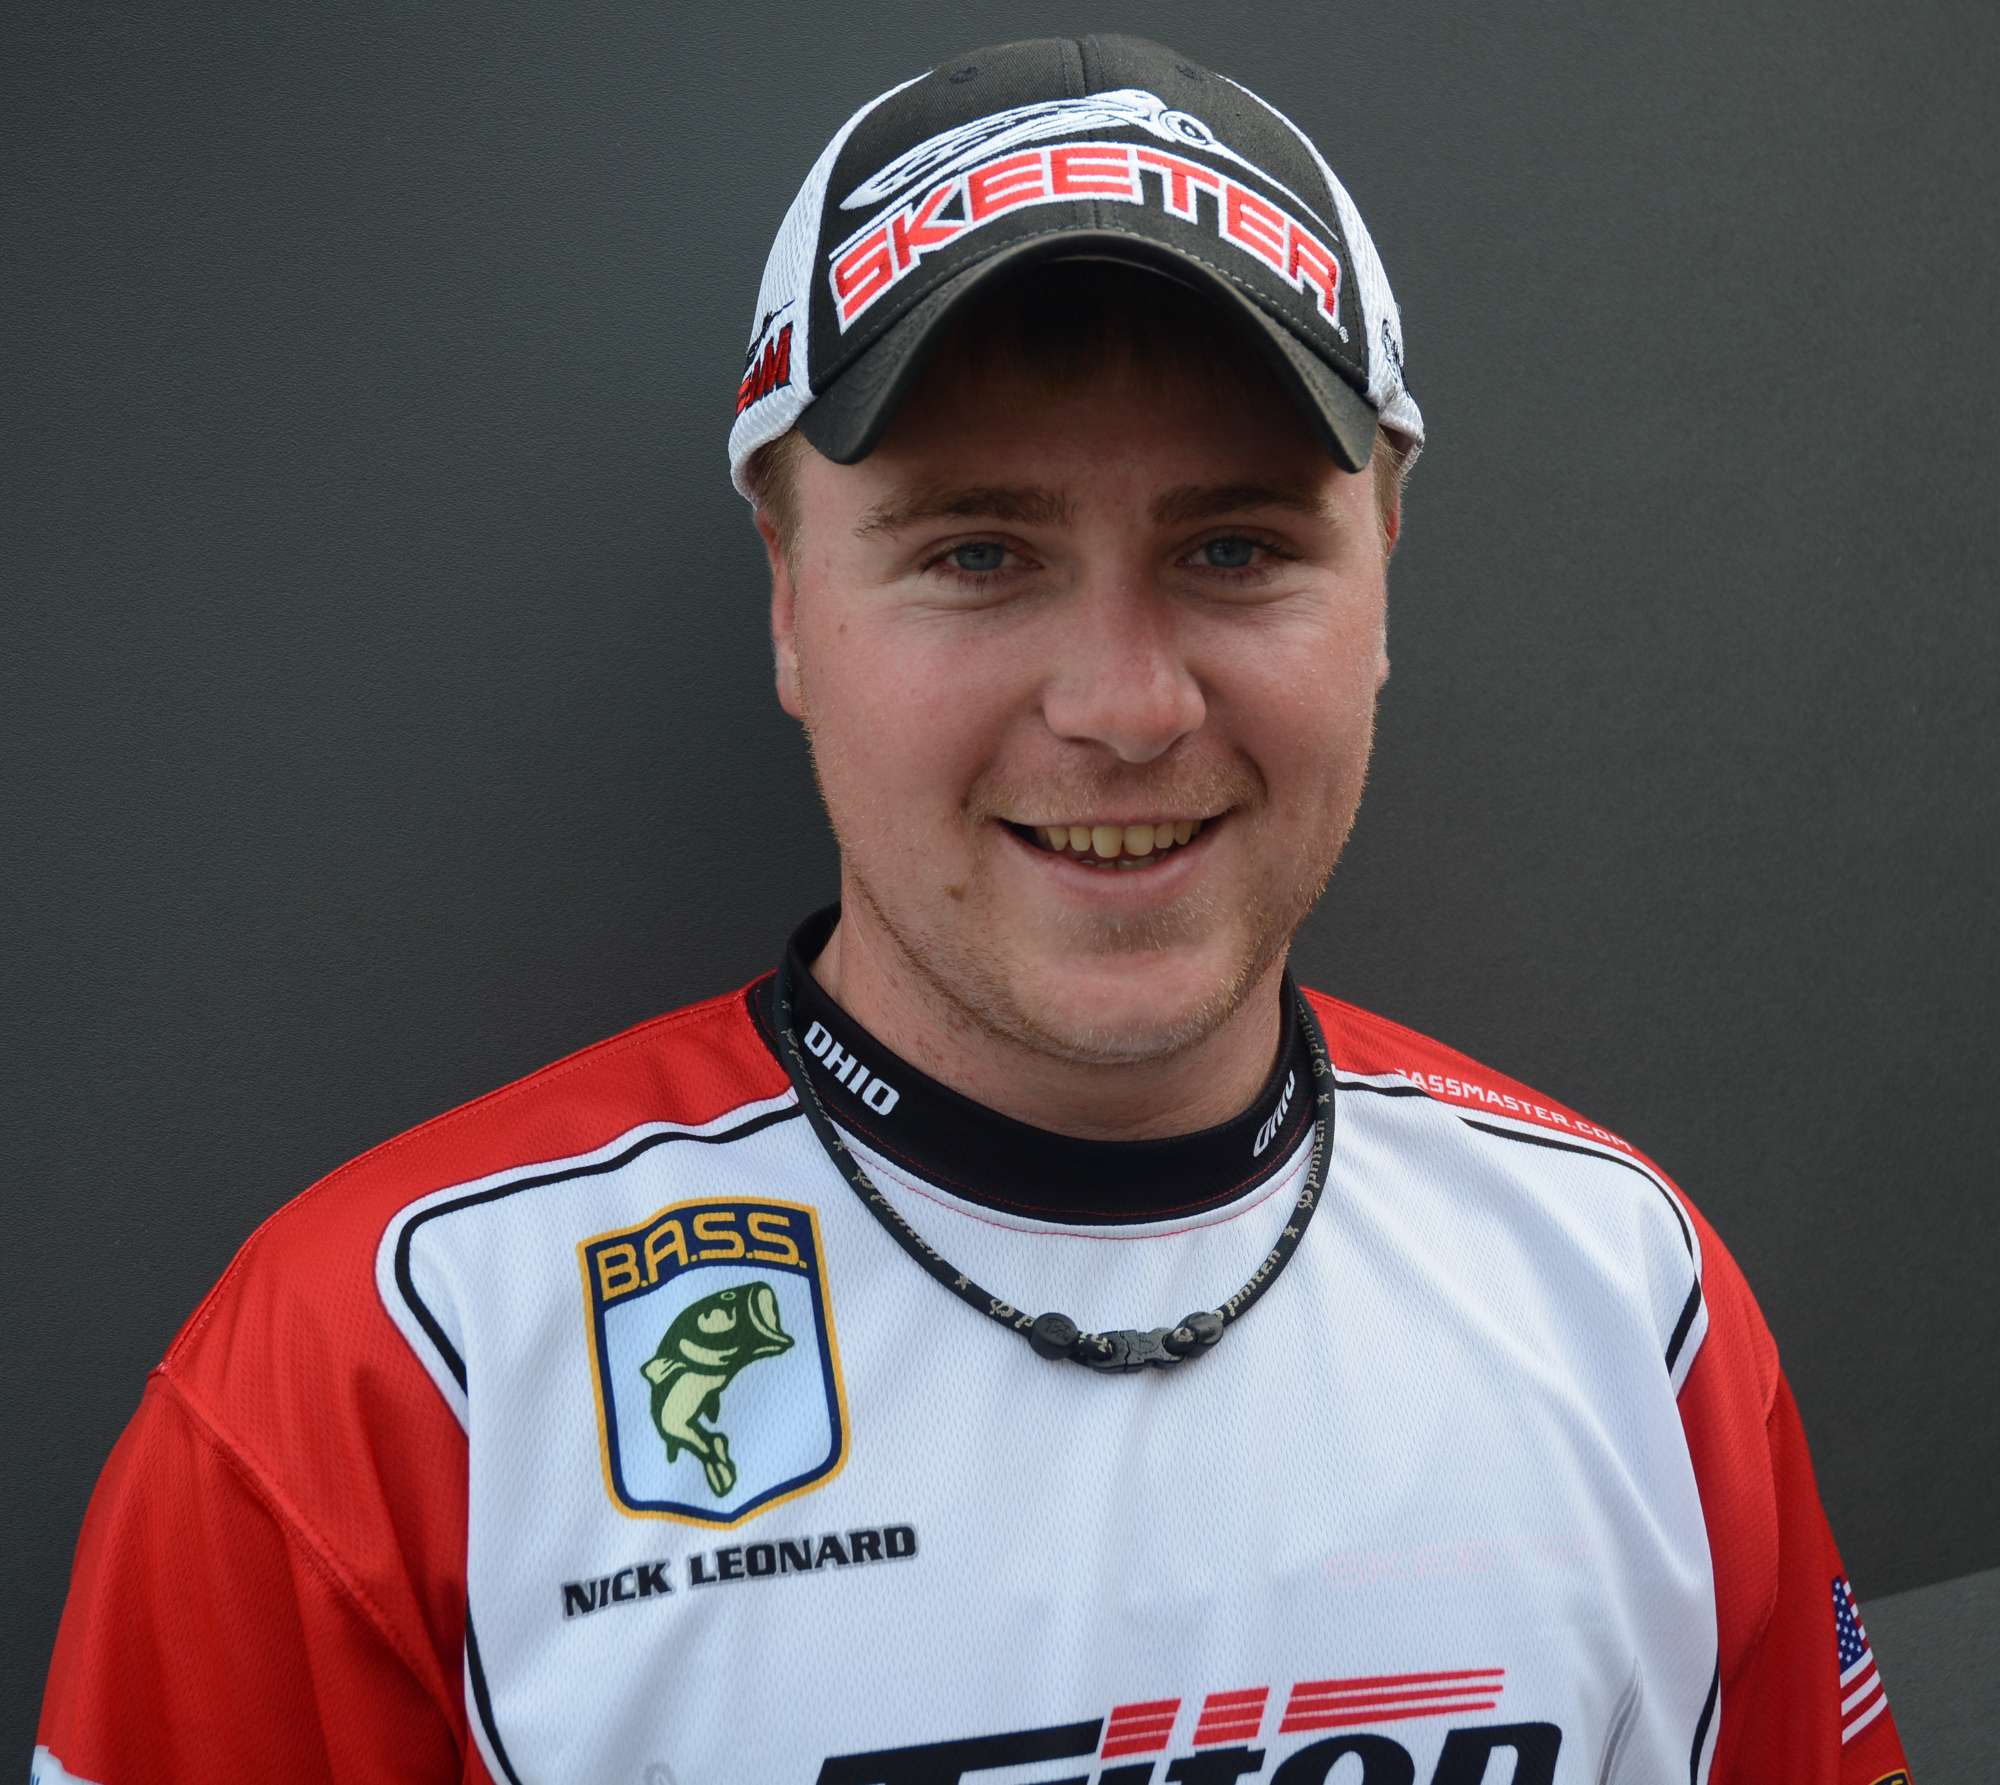 Nick Leonard is a proud member of the Bent Rod Bassmasters in Ohio. After qualifying for the state team three times, this will be his first time in the championship. Leonard keeps busy with two jobs, one as the parts manager at a boat dealer and the other as the supervisor at the tax manâs office.